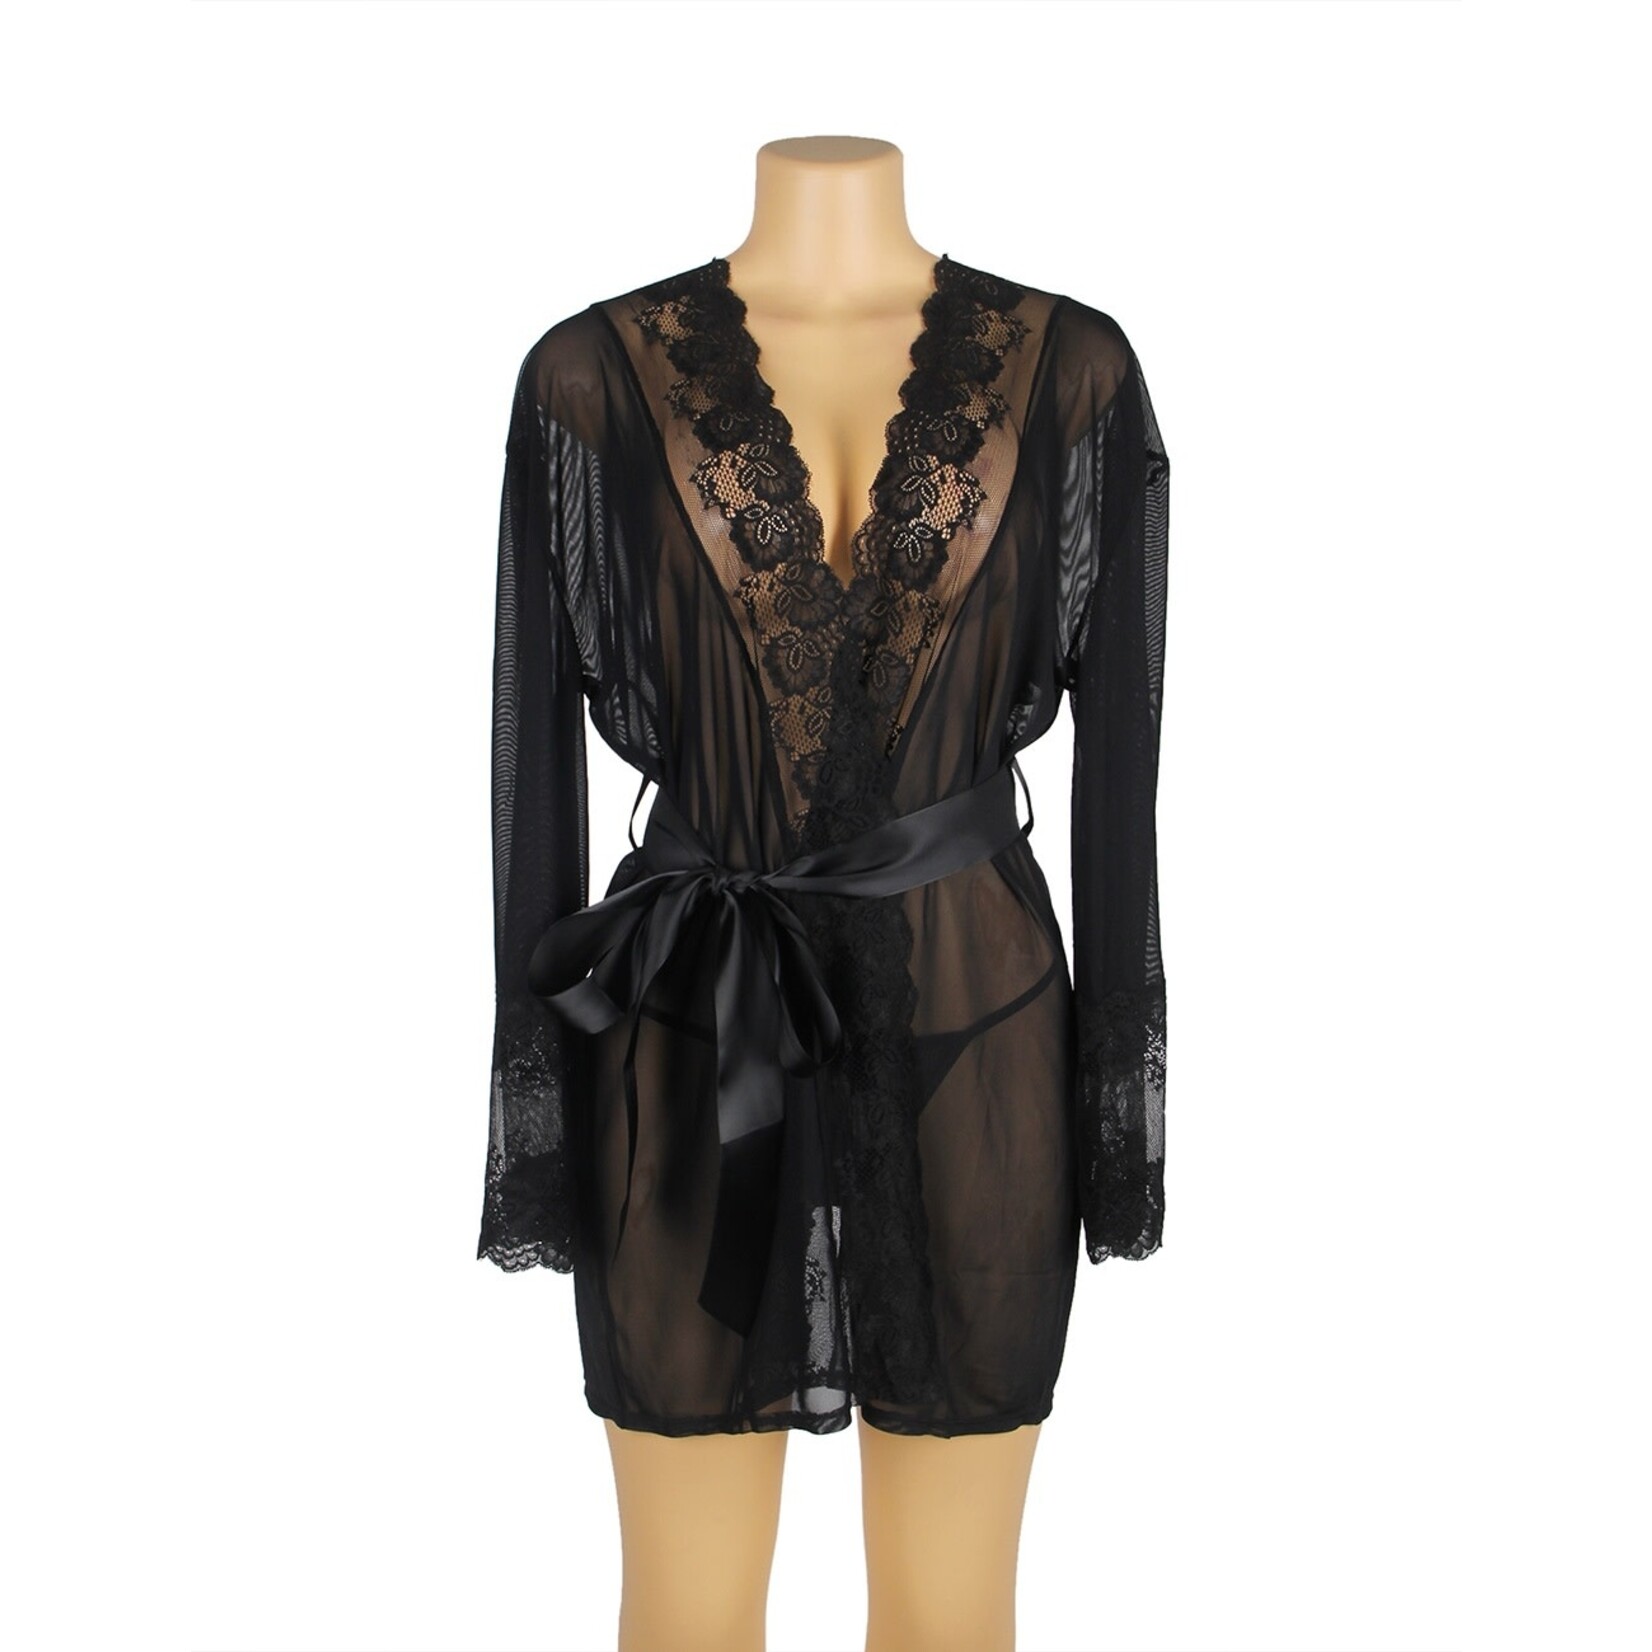 OH YEAH! -  BLACK LACE SEXY HOLLOW OUT BACK DESIGN ROBE LINGERIE WITH PANTIES M-L